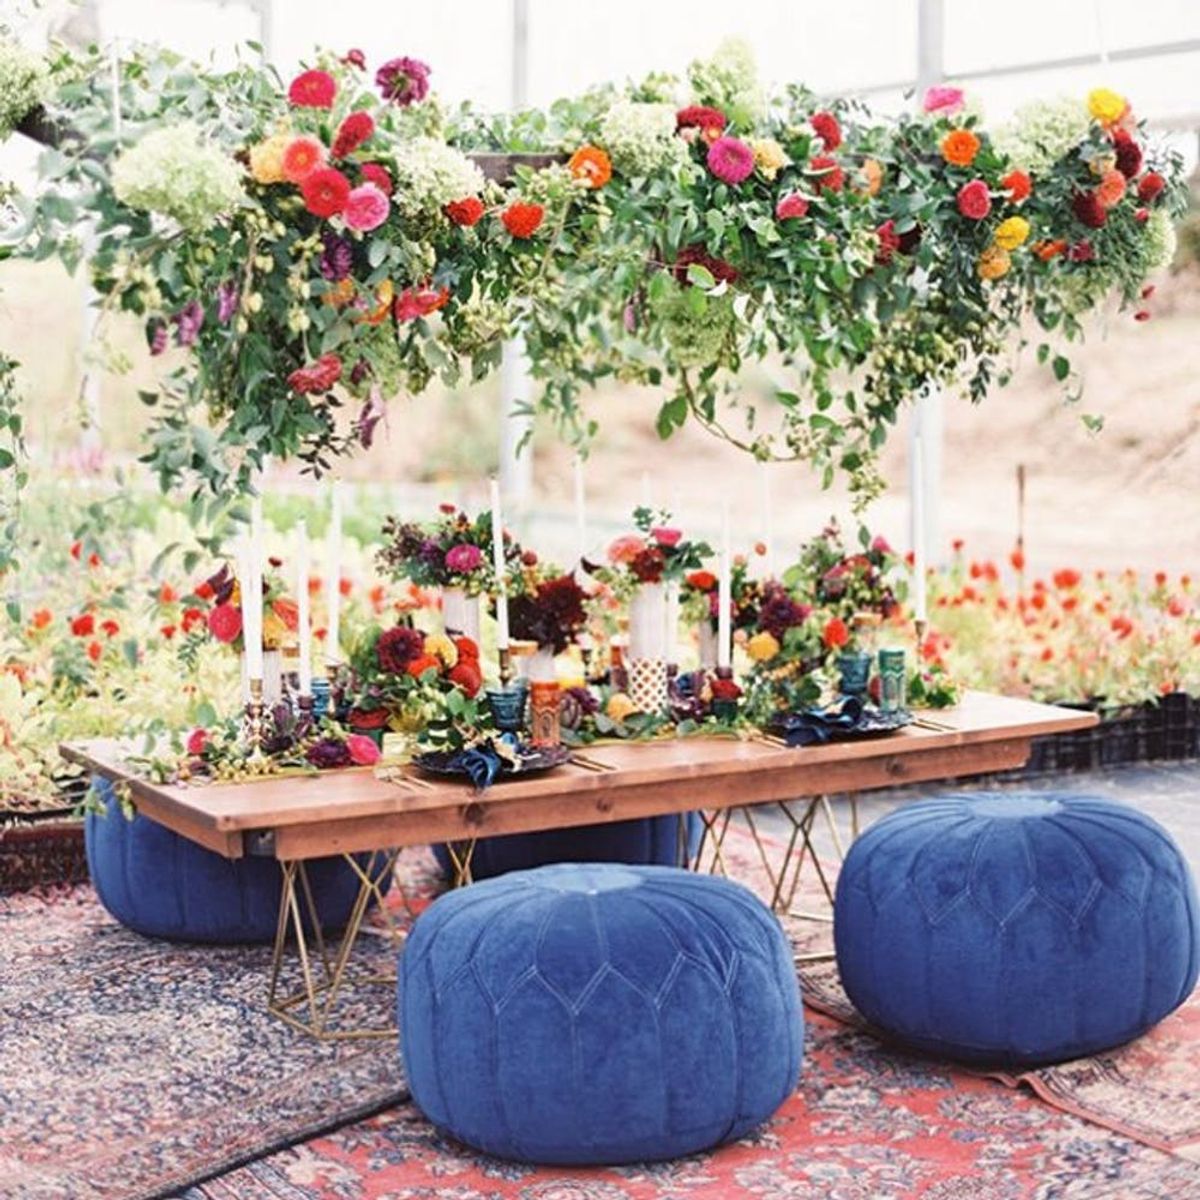 18 Hanging Flower Displays for Your Wedding